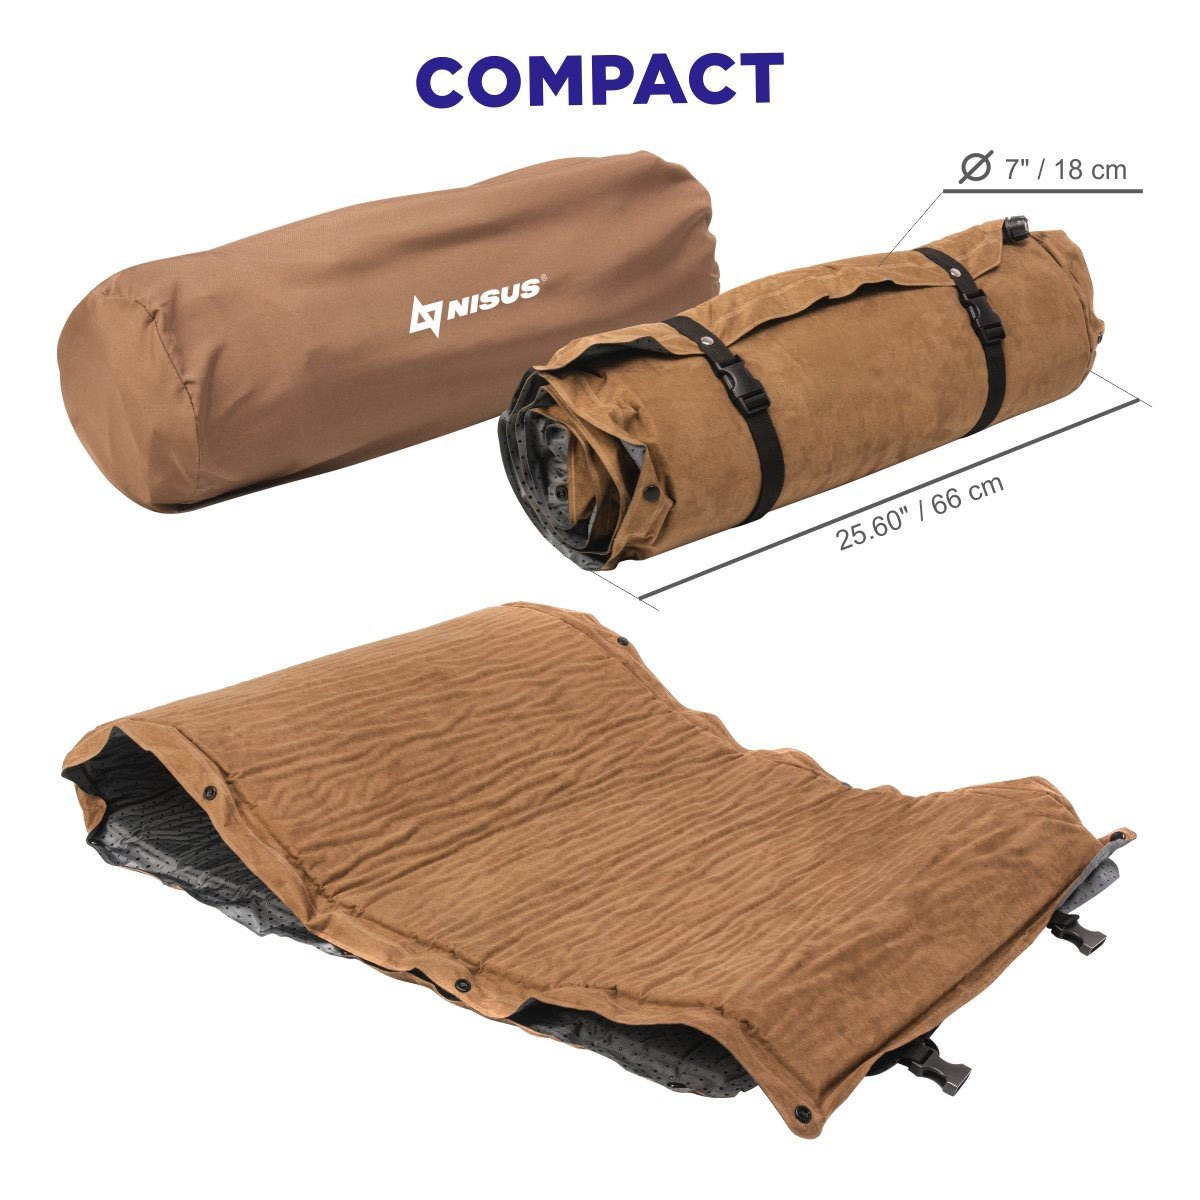 2-inch Lightweight Self Inflating Camping Sleeping Pad is stored in a travel case